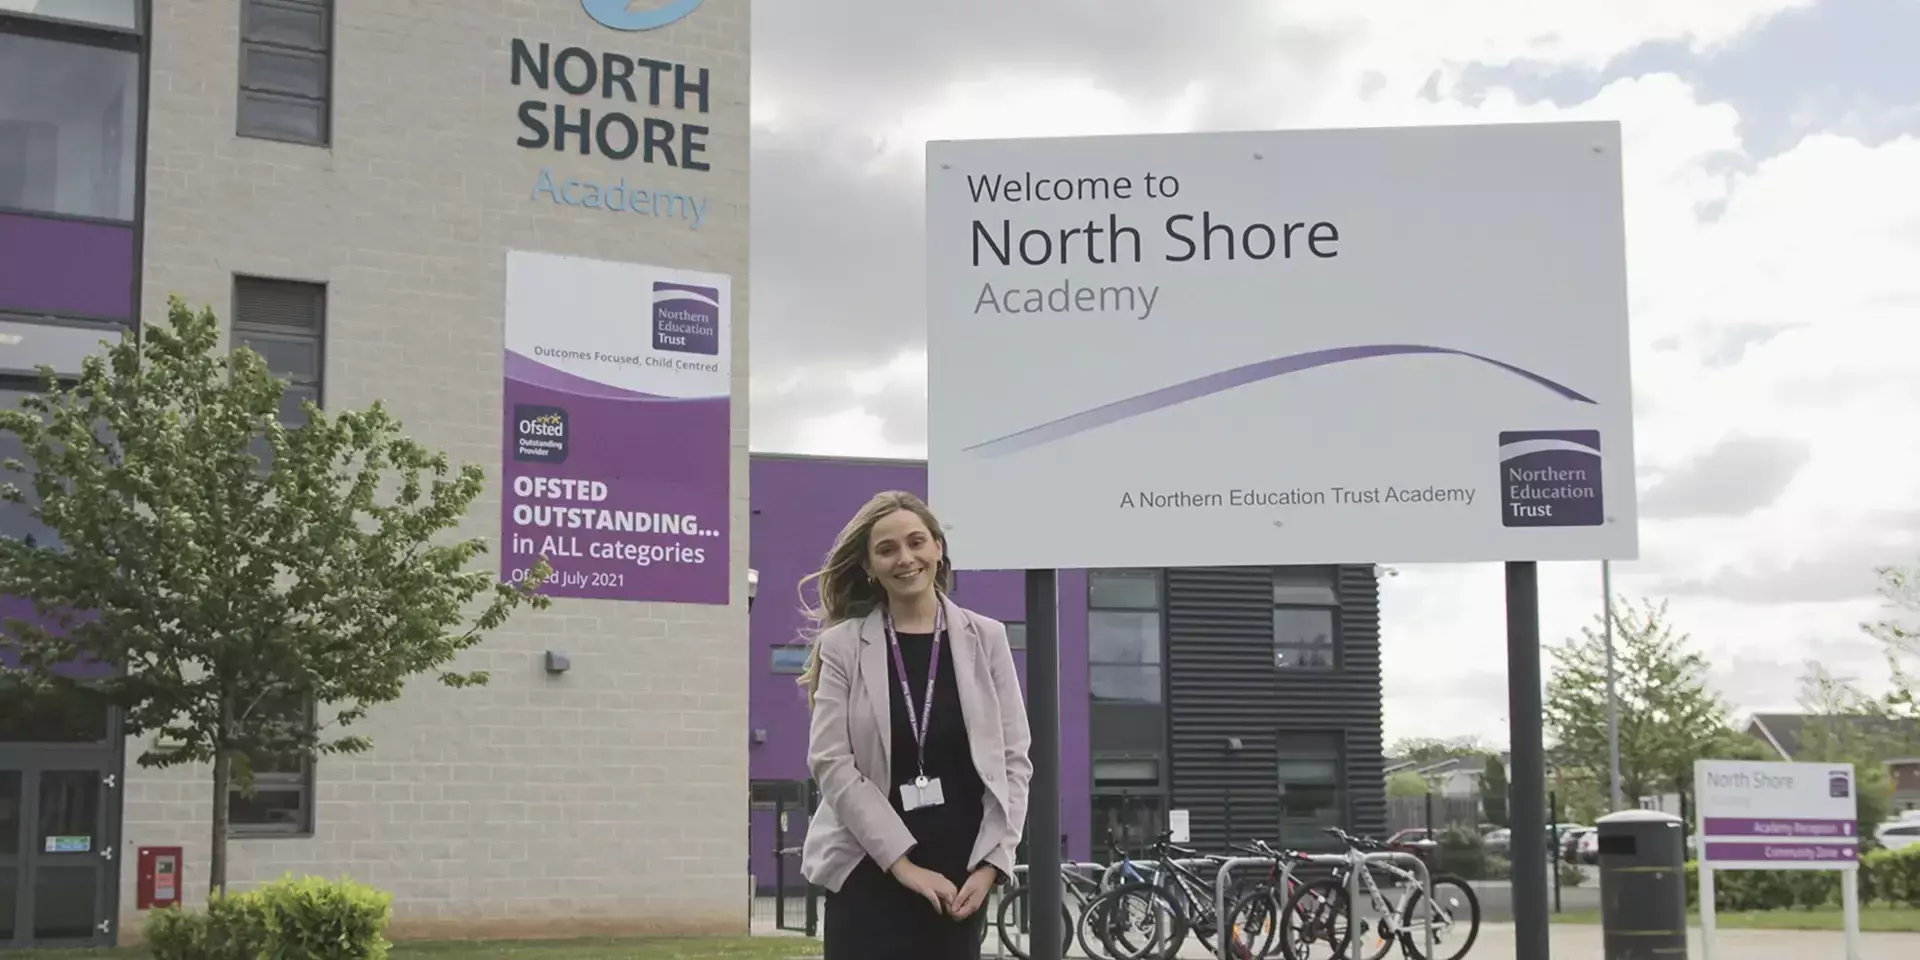 a teacher stood in front of the entrance sign to north shore academy